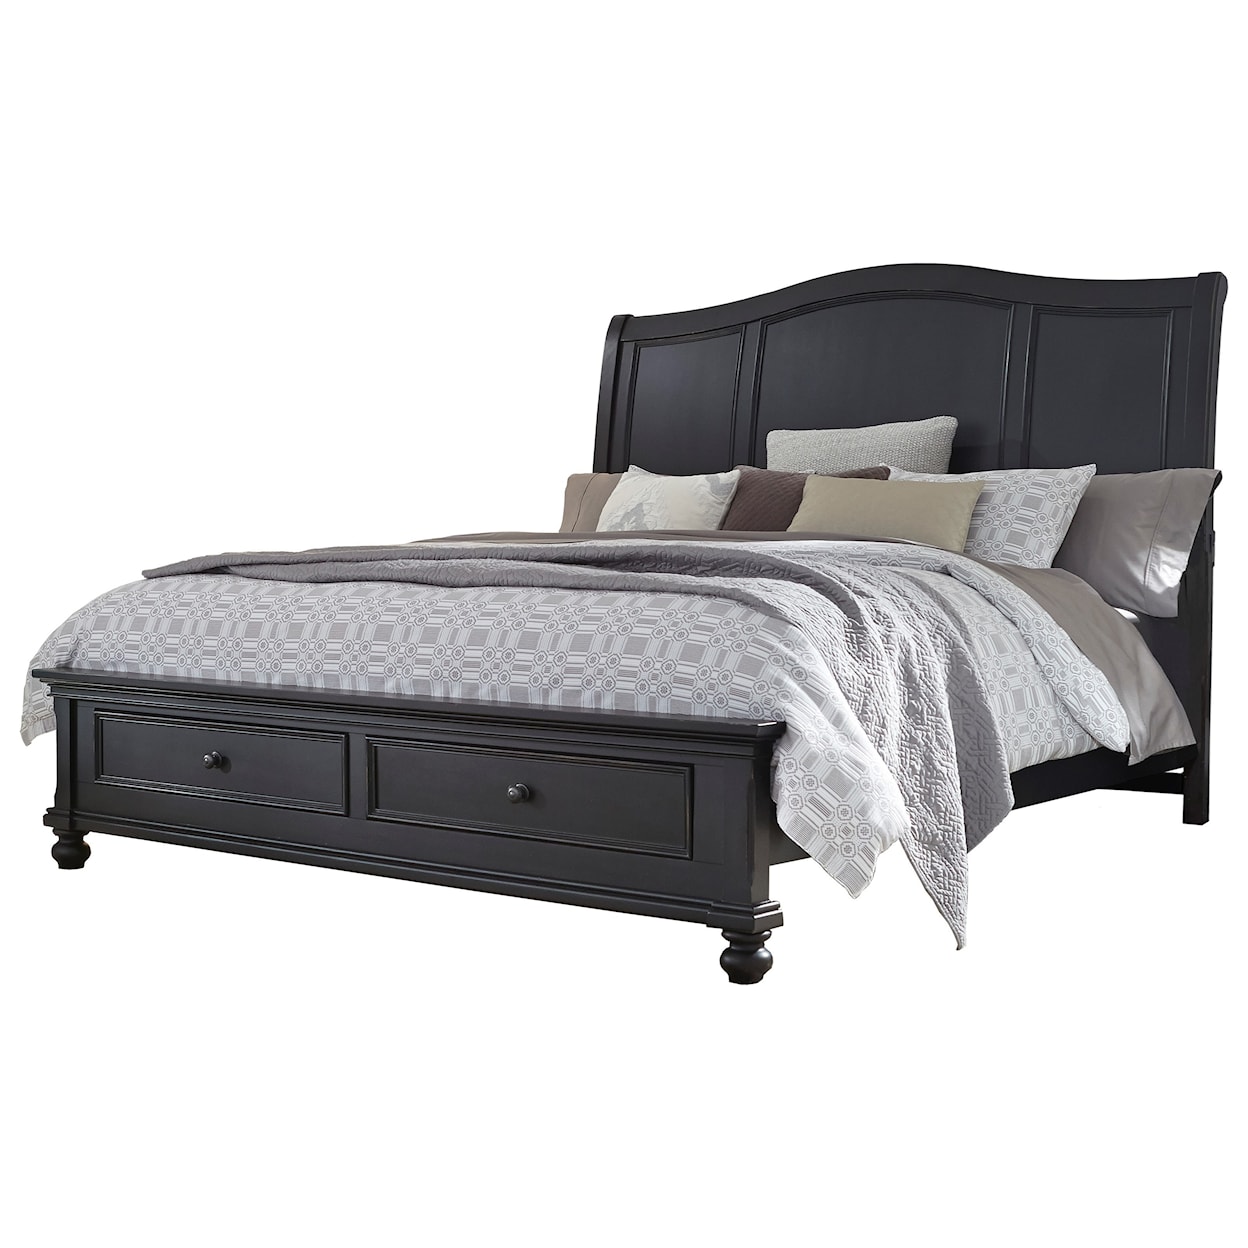 Aspenhome Oxford King Sleigh Storage Bed